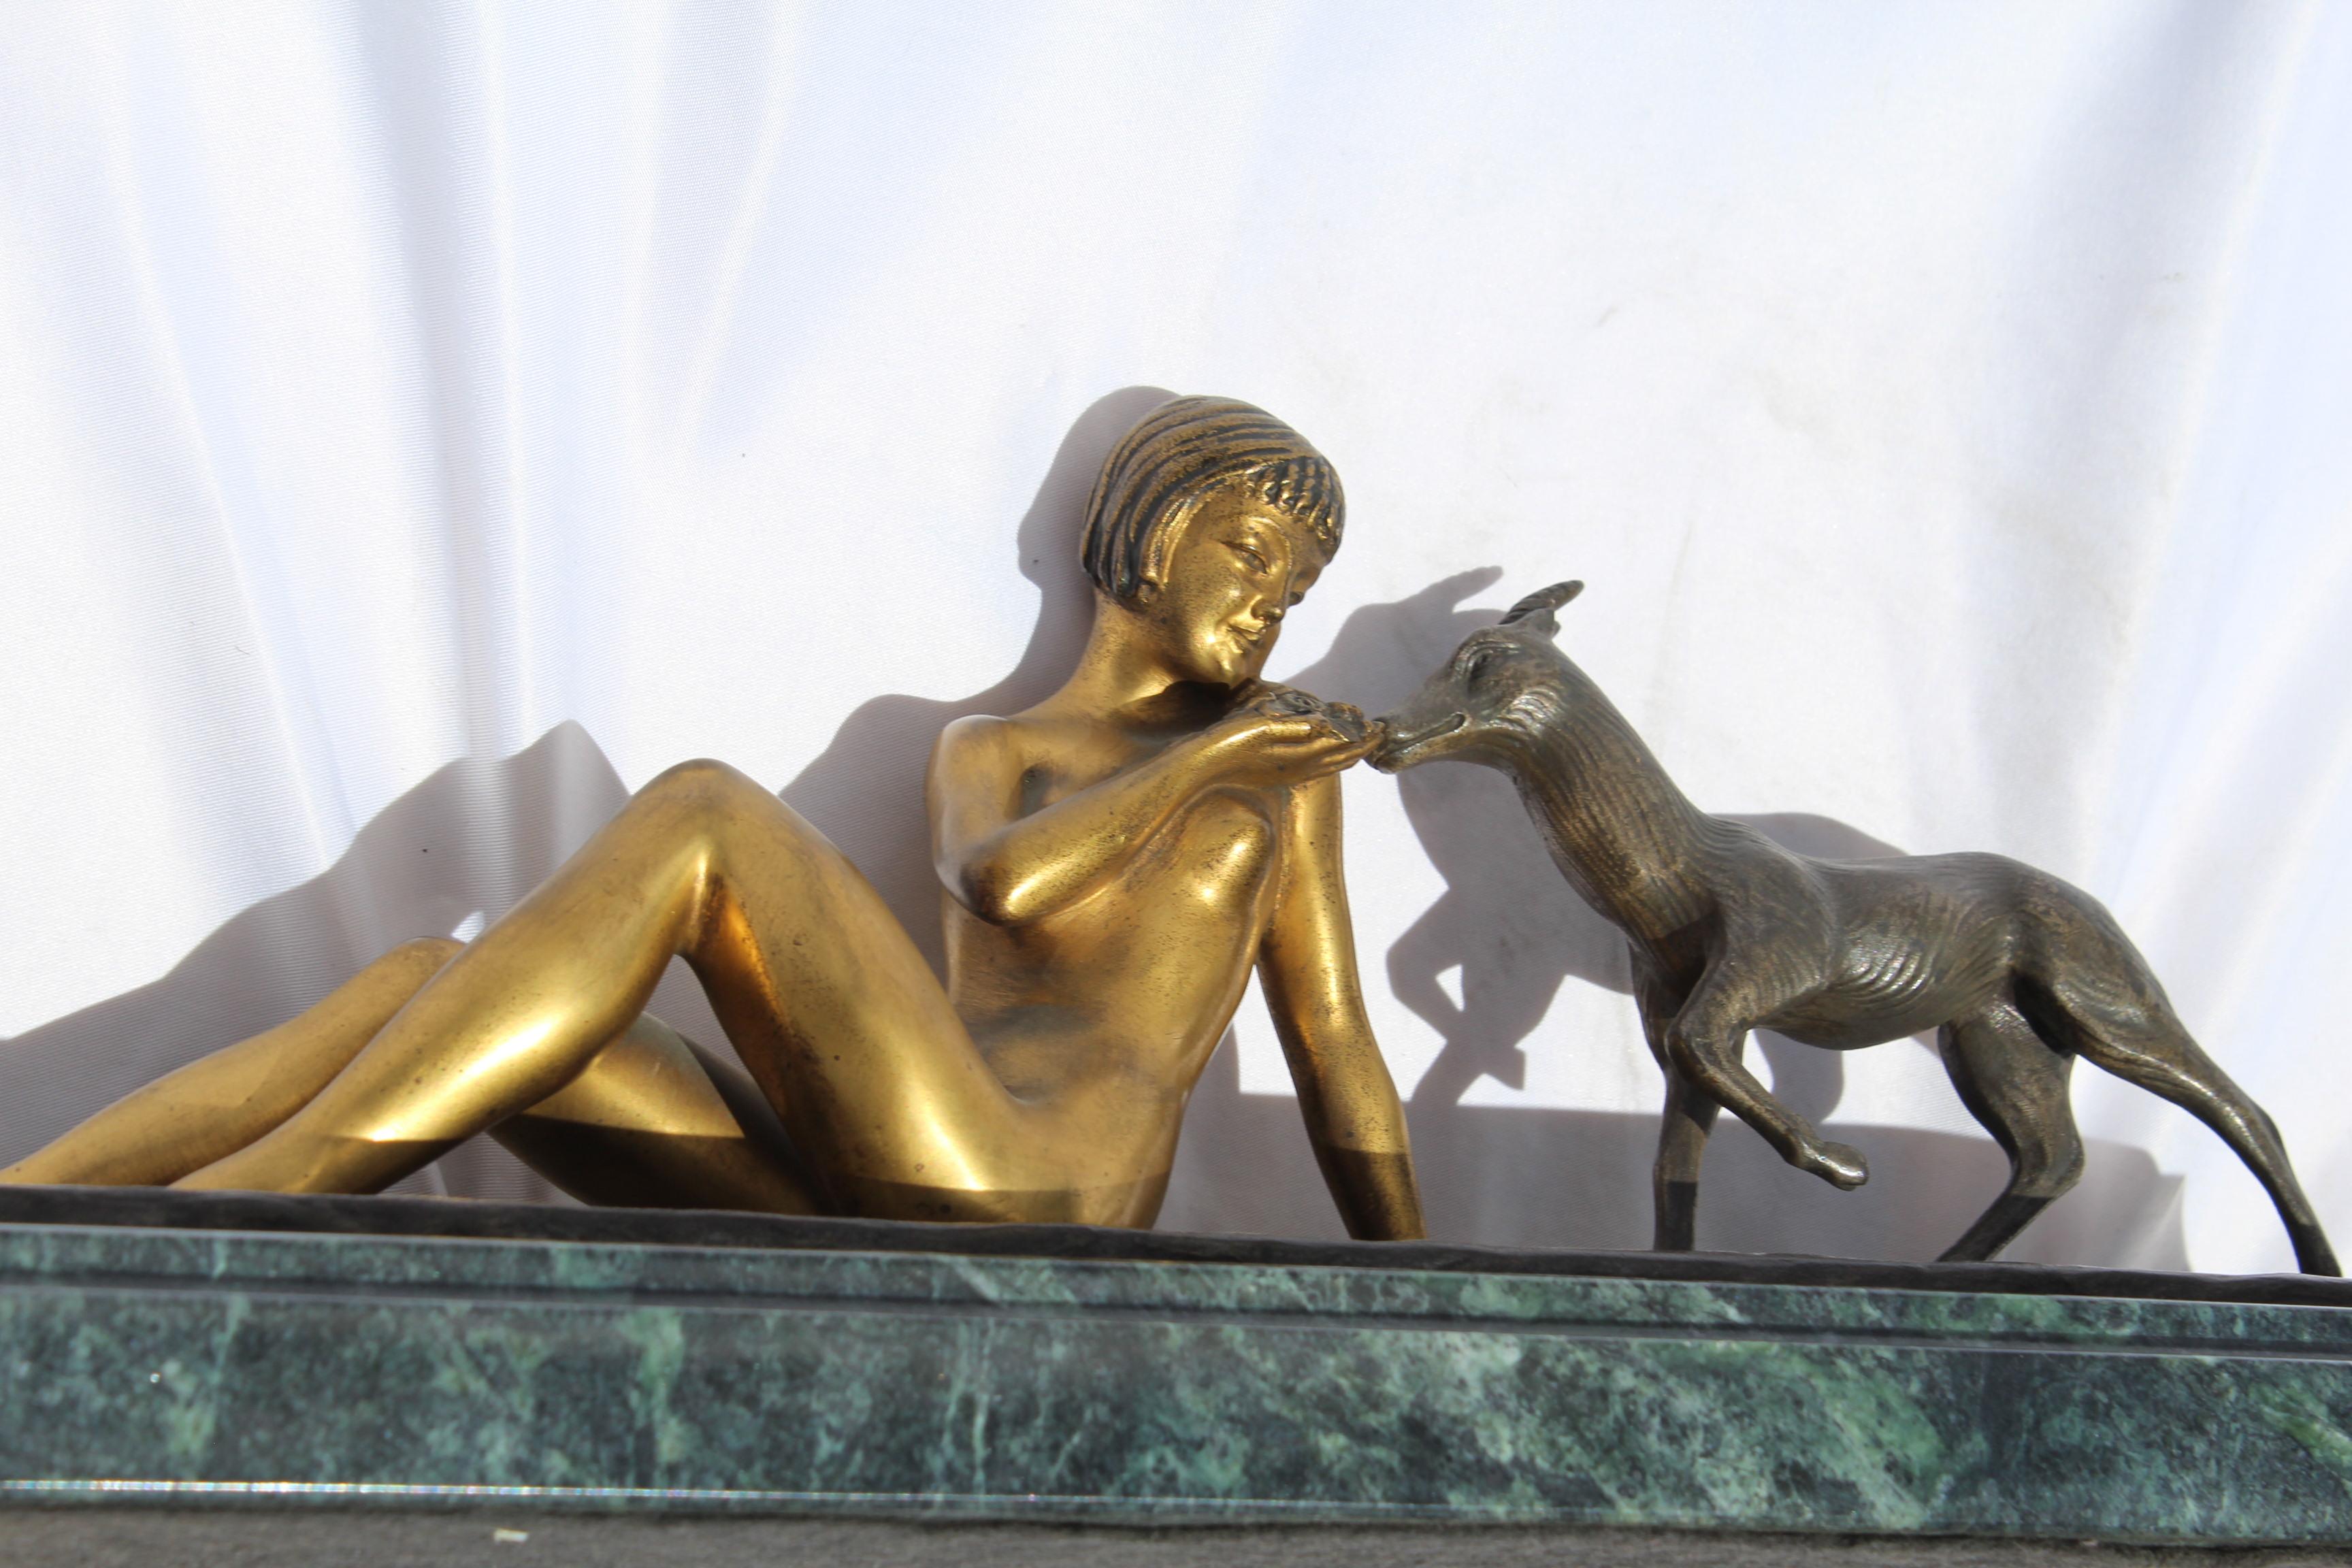 Young girl nude feeding a goat. Has doré gold patina. Mounted on dark green marble. Signed by the French artist (Renaud) heavy at 17 1/2